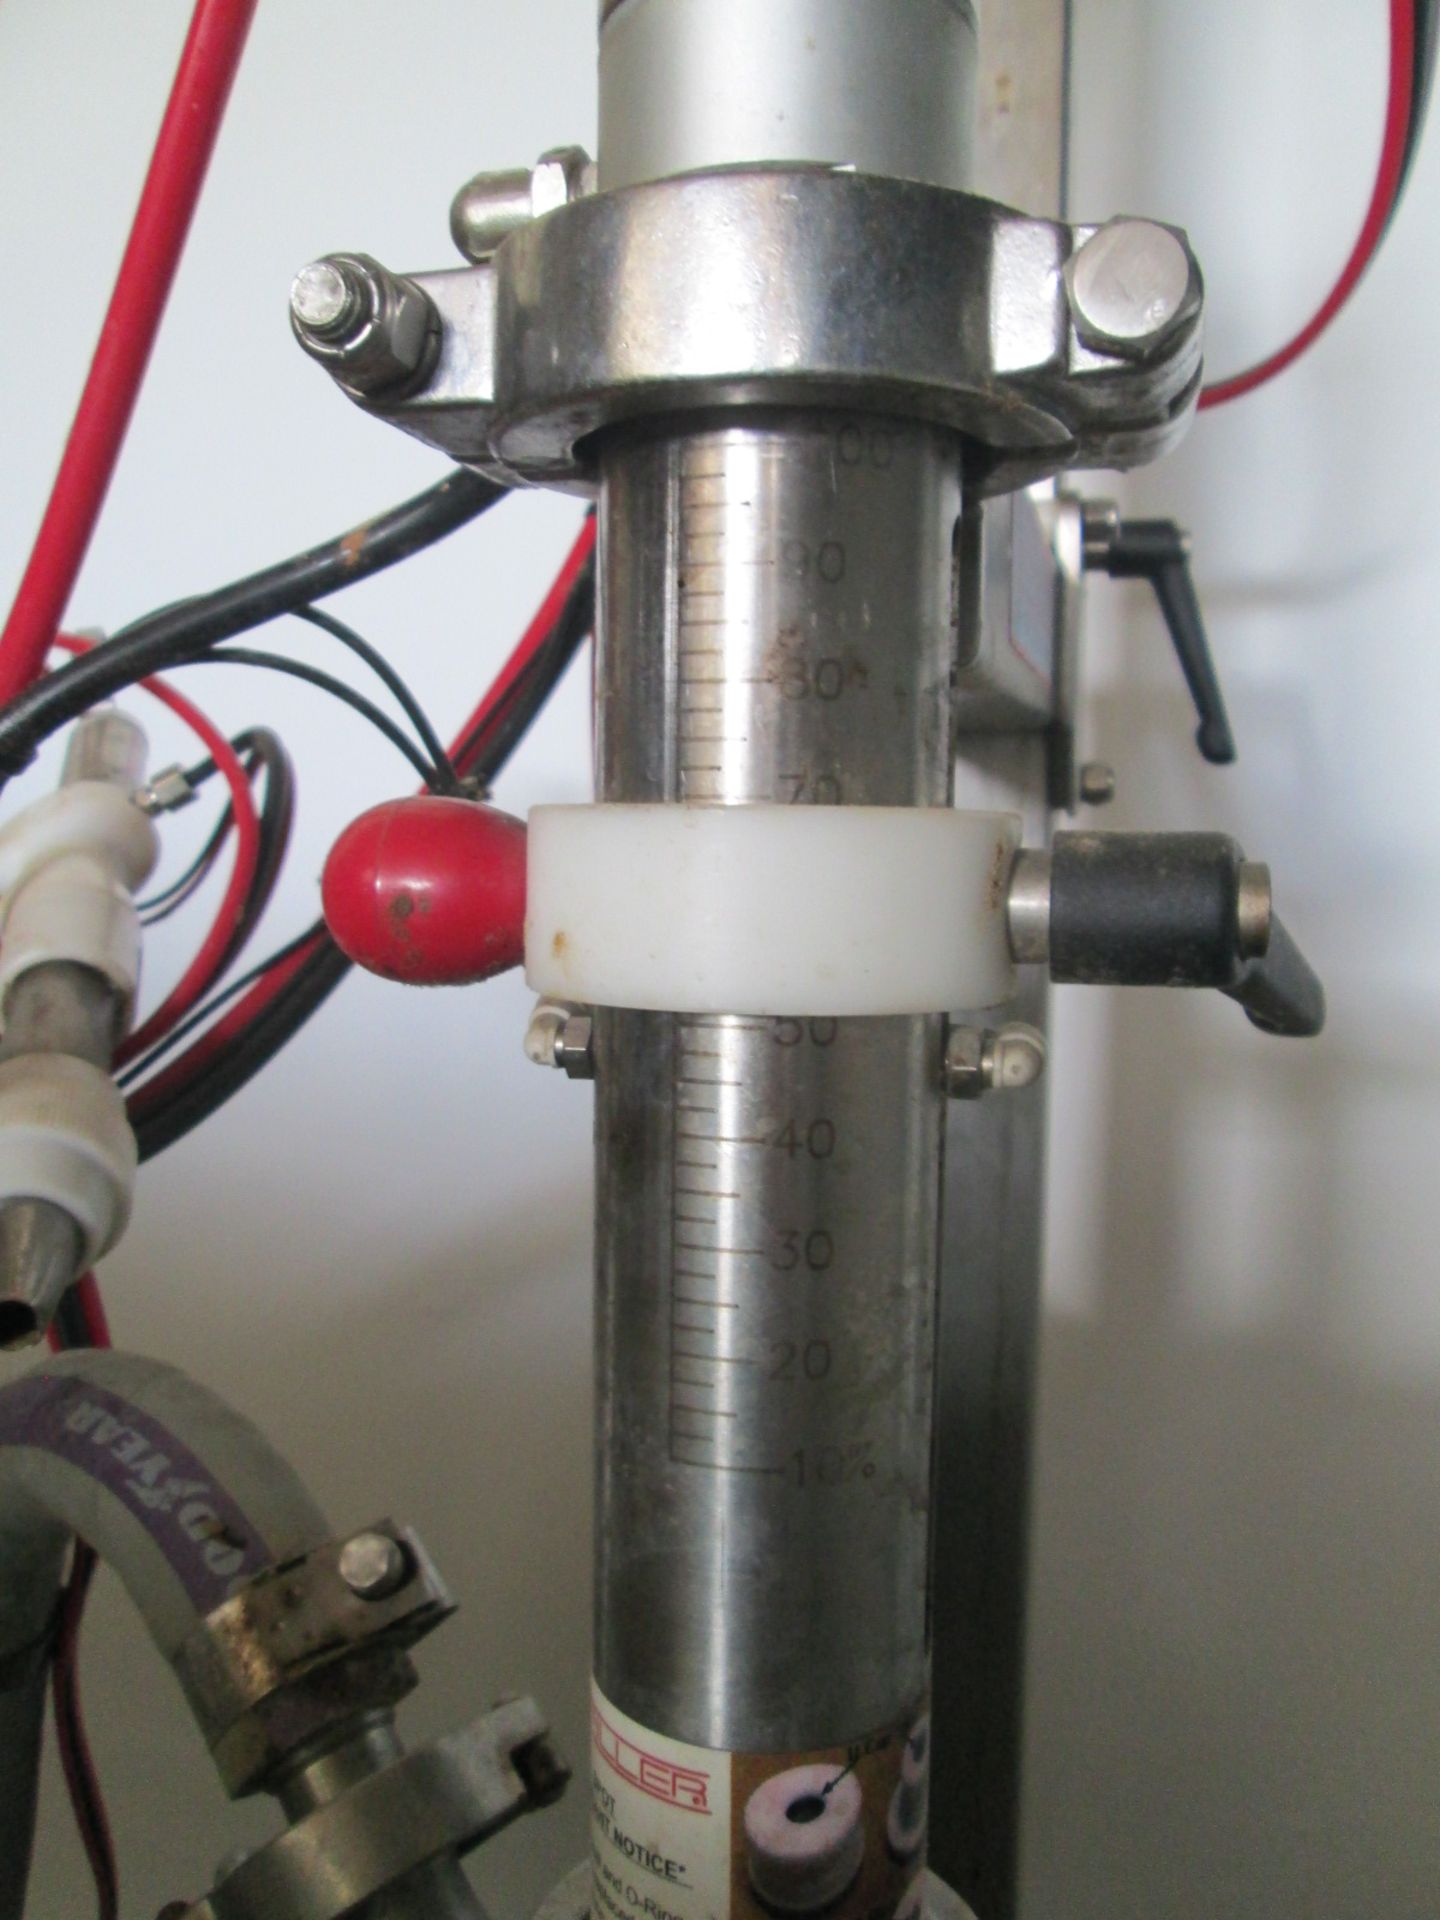 Unifiller Systems Inc, Stainless Steel Single Nozzle "SPOT" Filler. Stainless Steel Construction, - Image 10 of 19